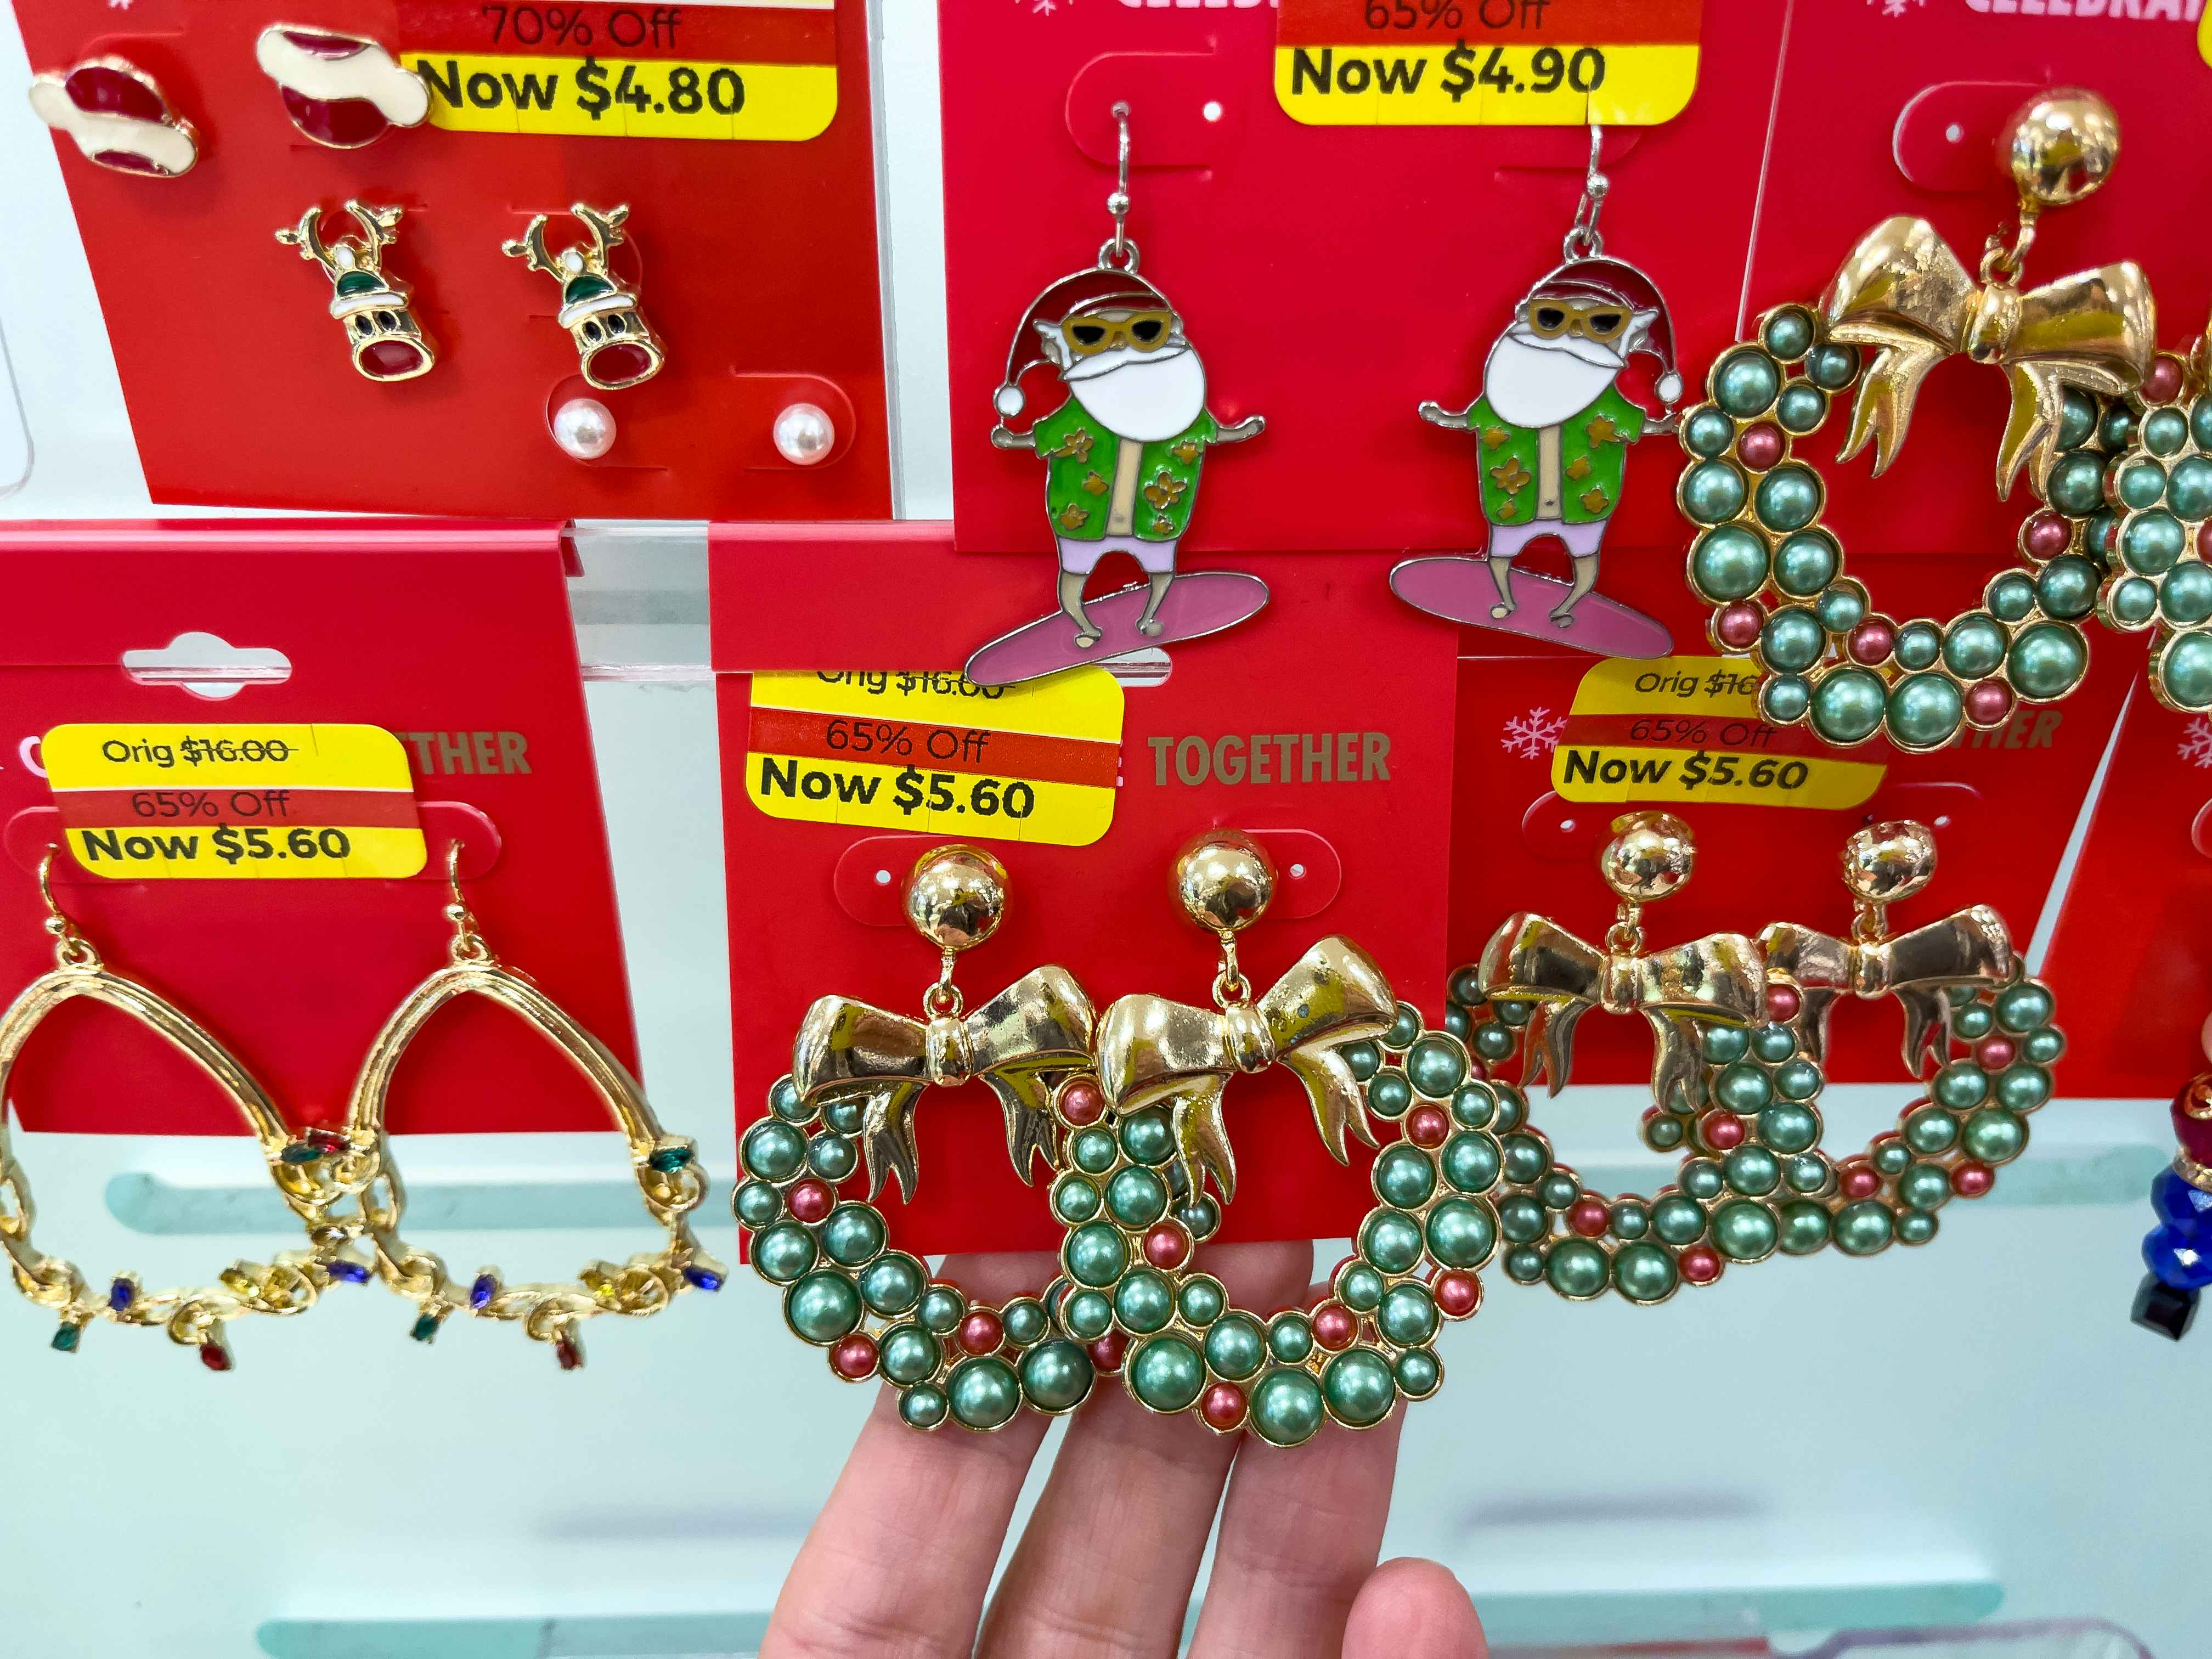 A variety of earrings hanging from a store rack